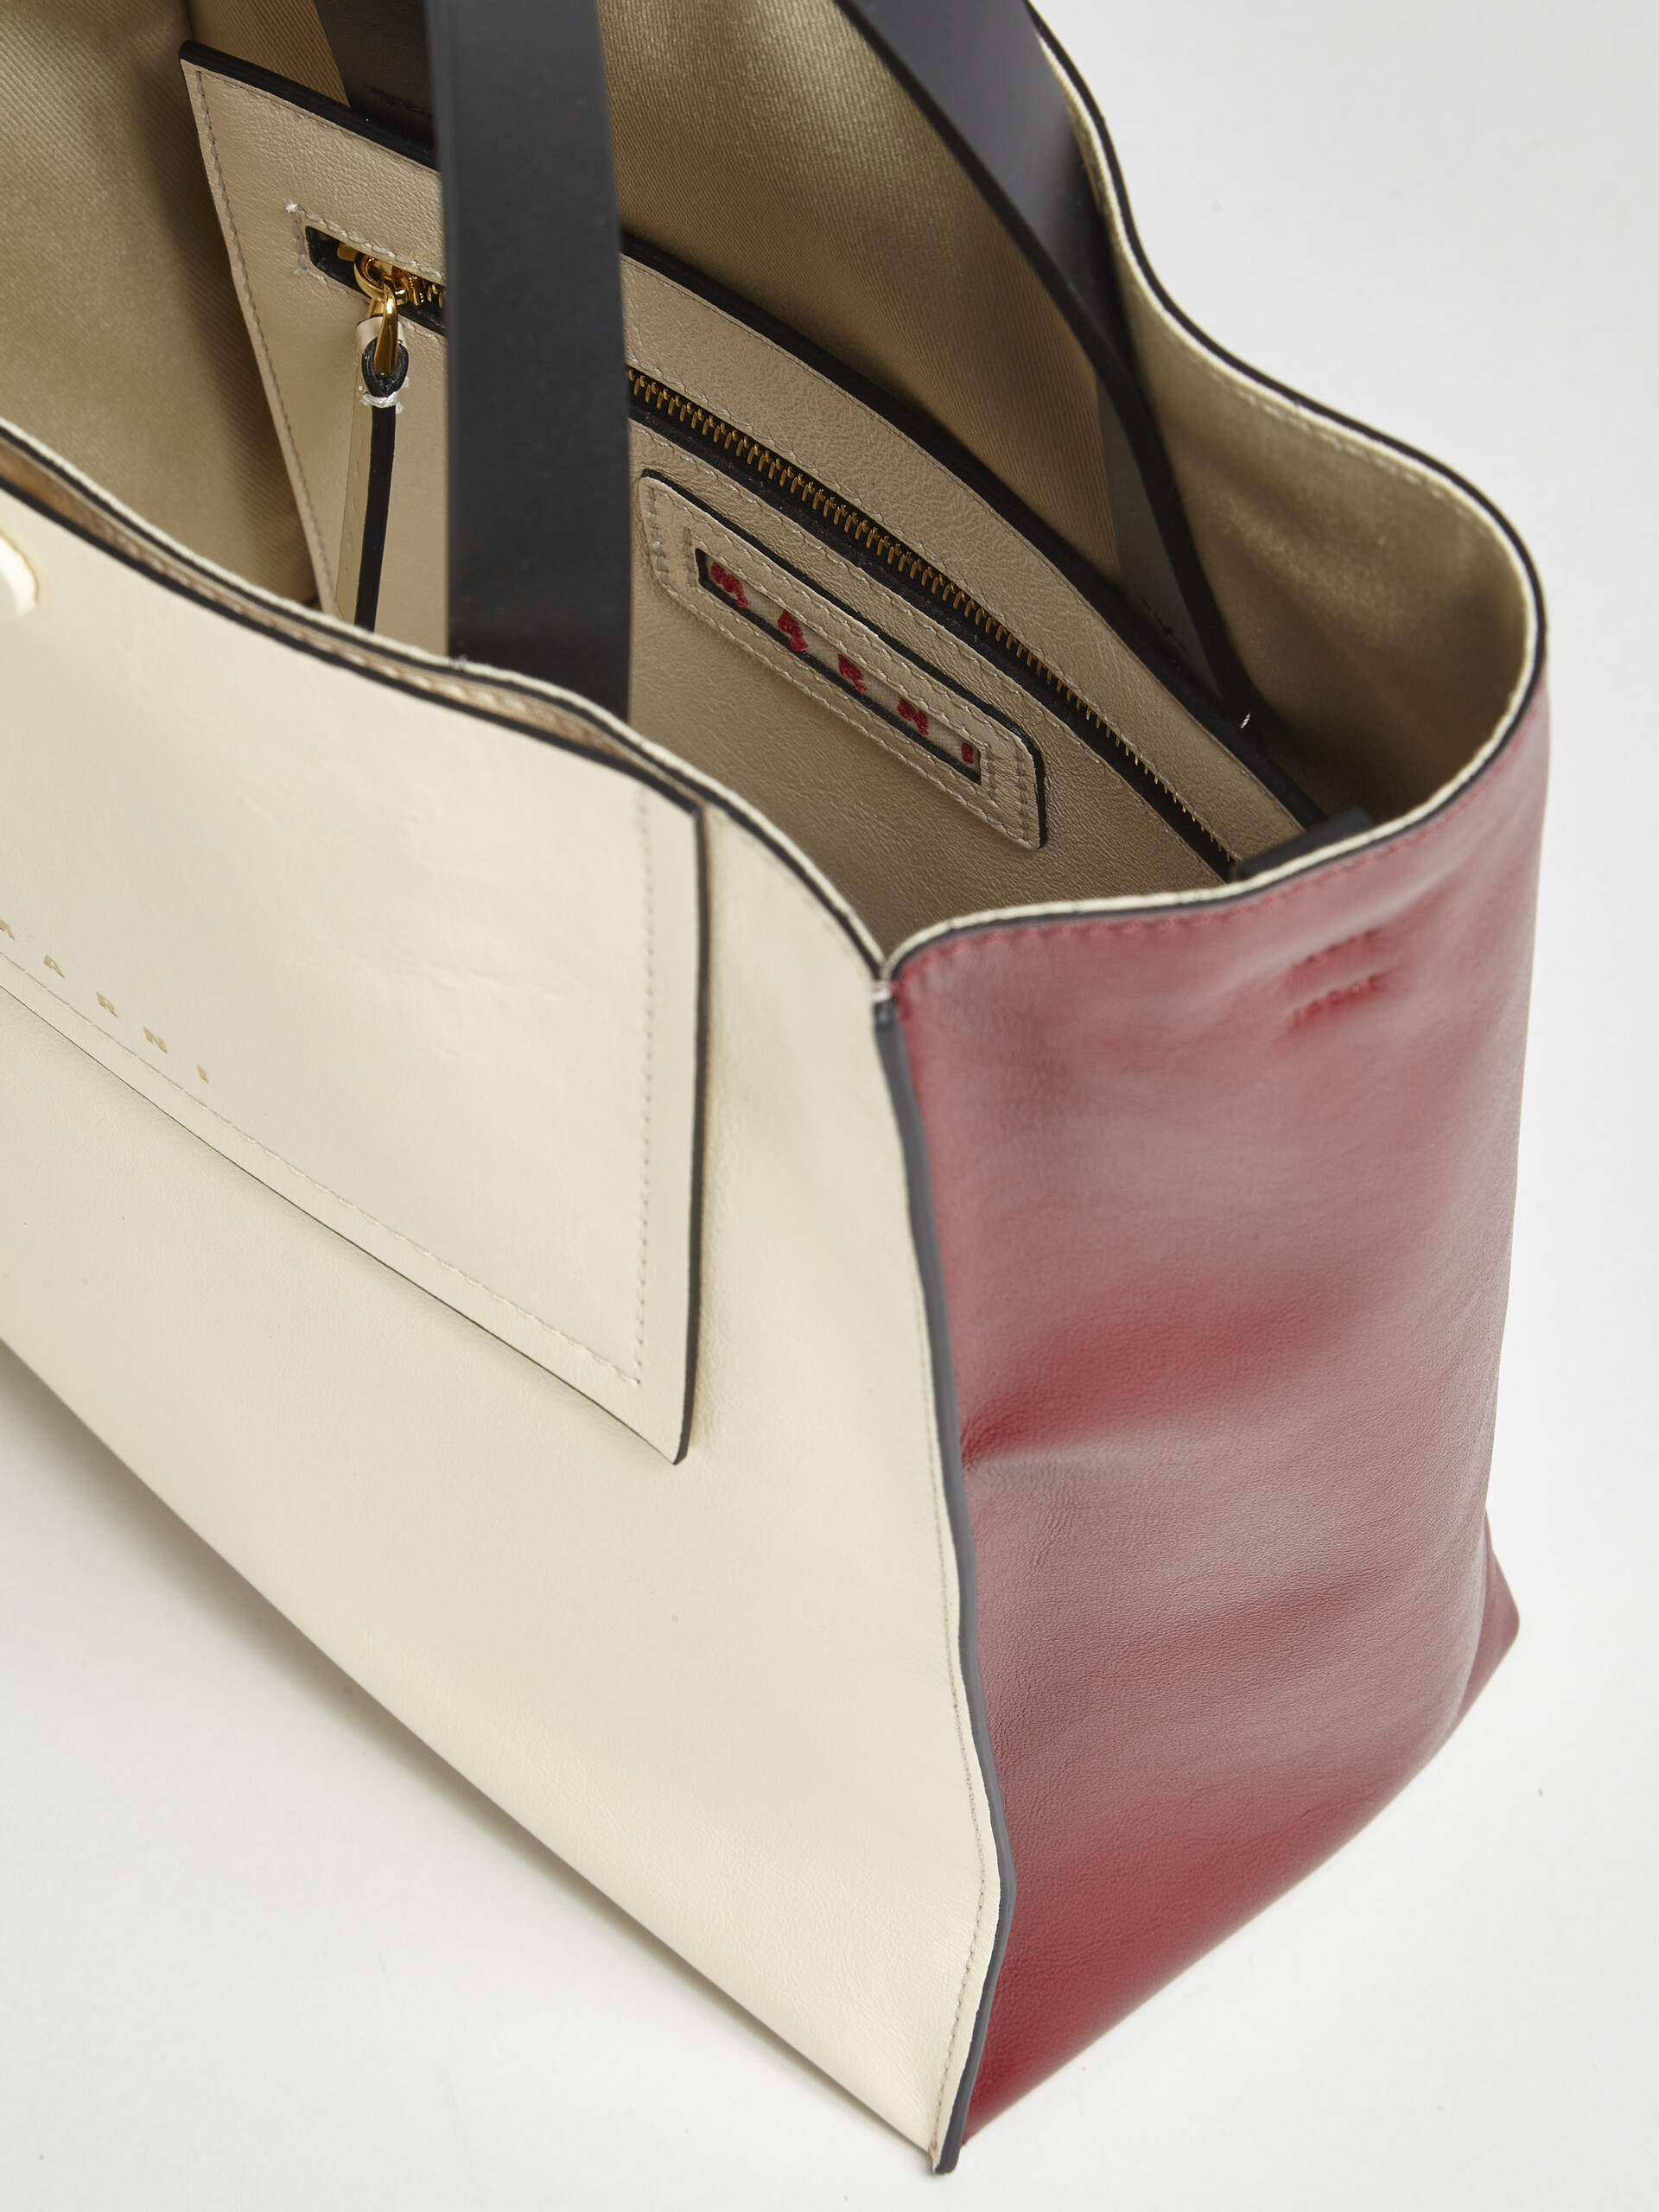 MUSEO SOFT small bag in white and dark red leather - Shopping Bags - Image 3